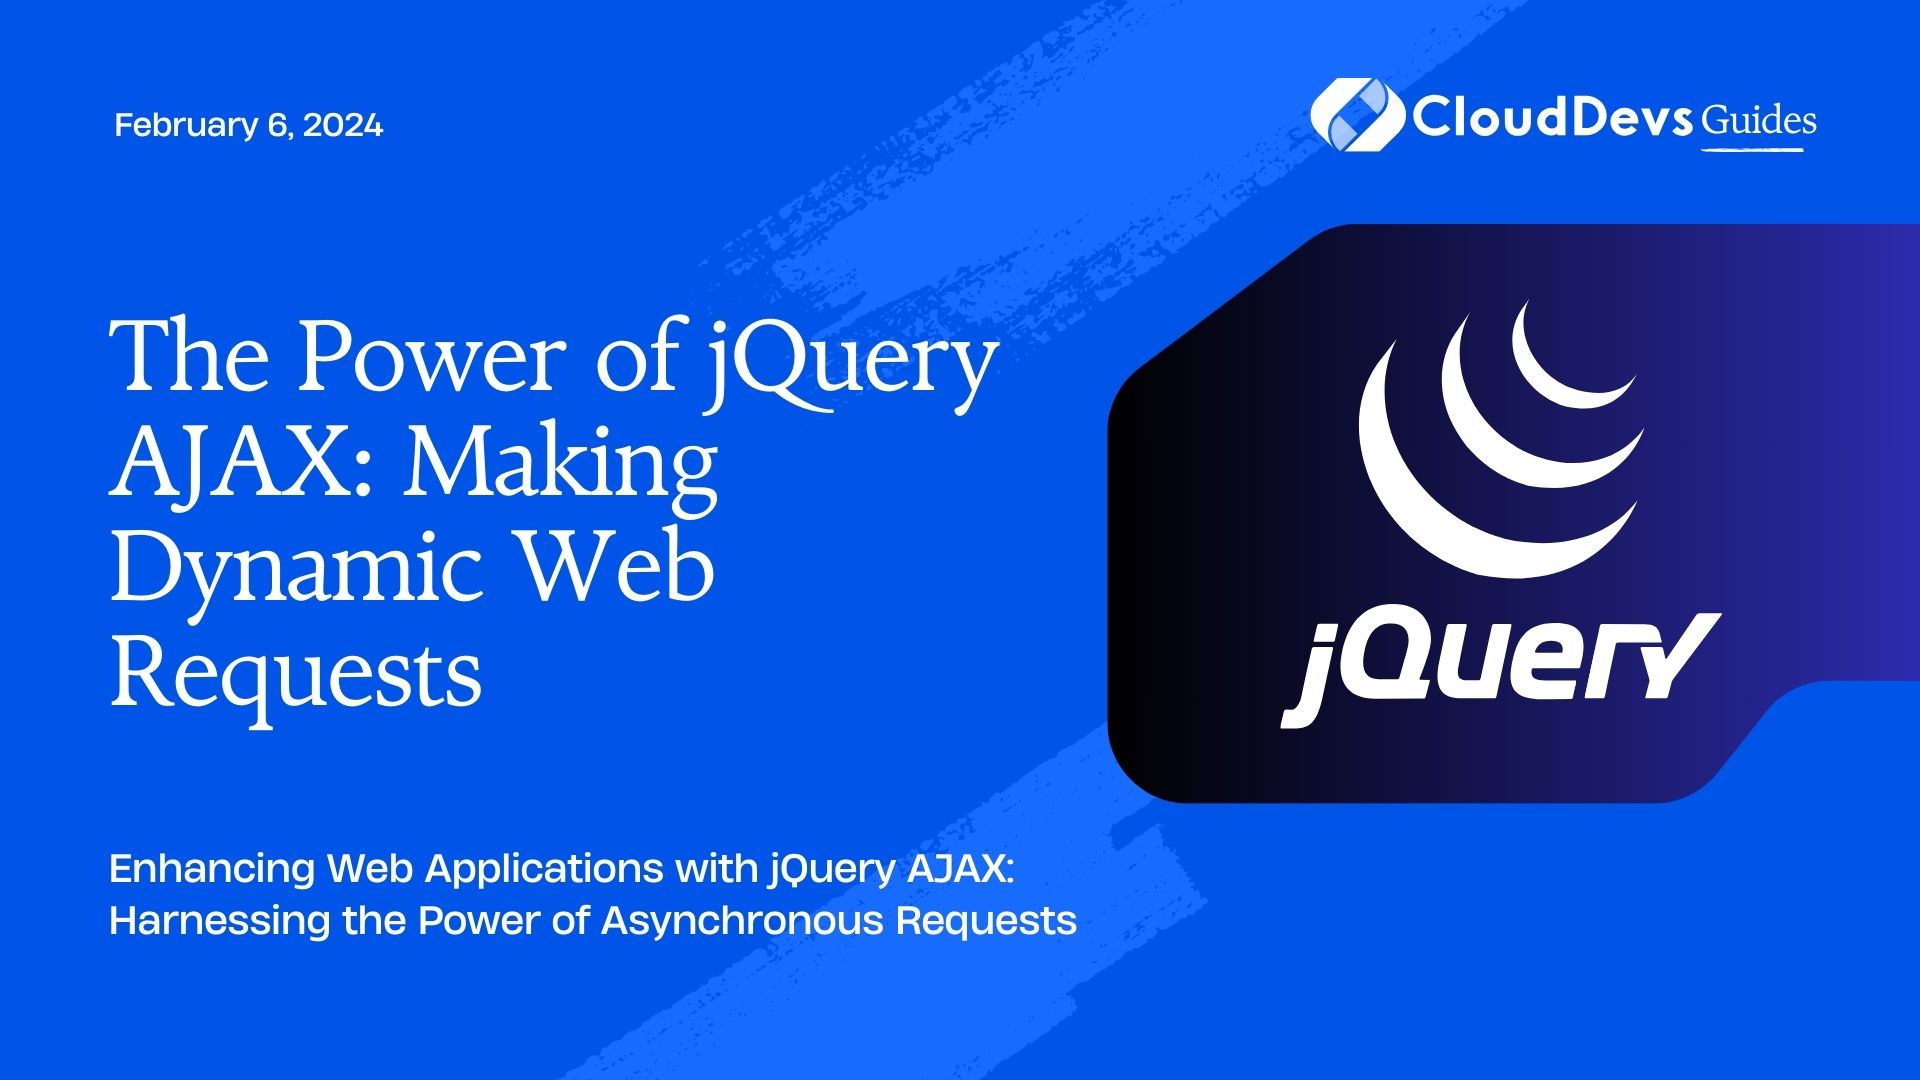 The Power of jQuery AJAX: Making Dynamic Web Requests